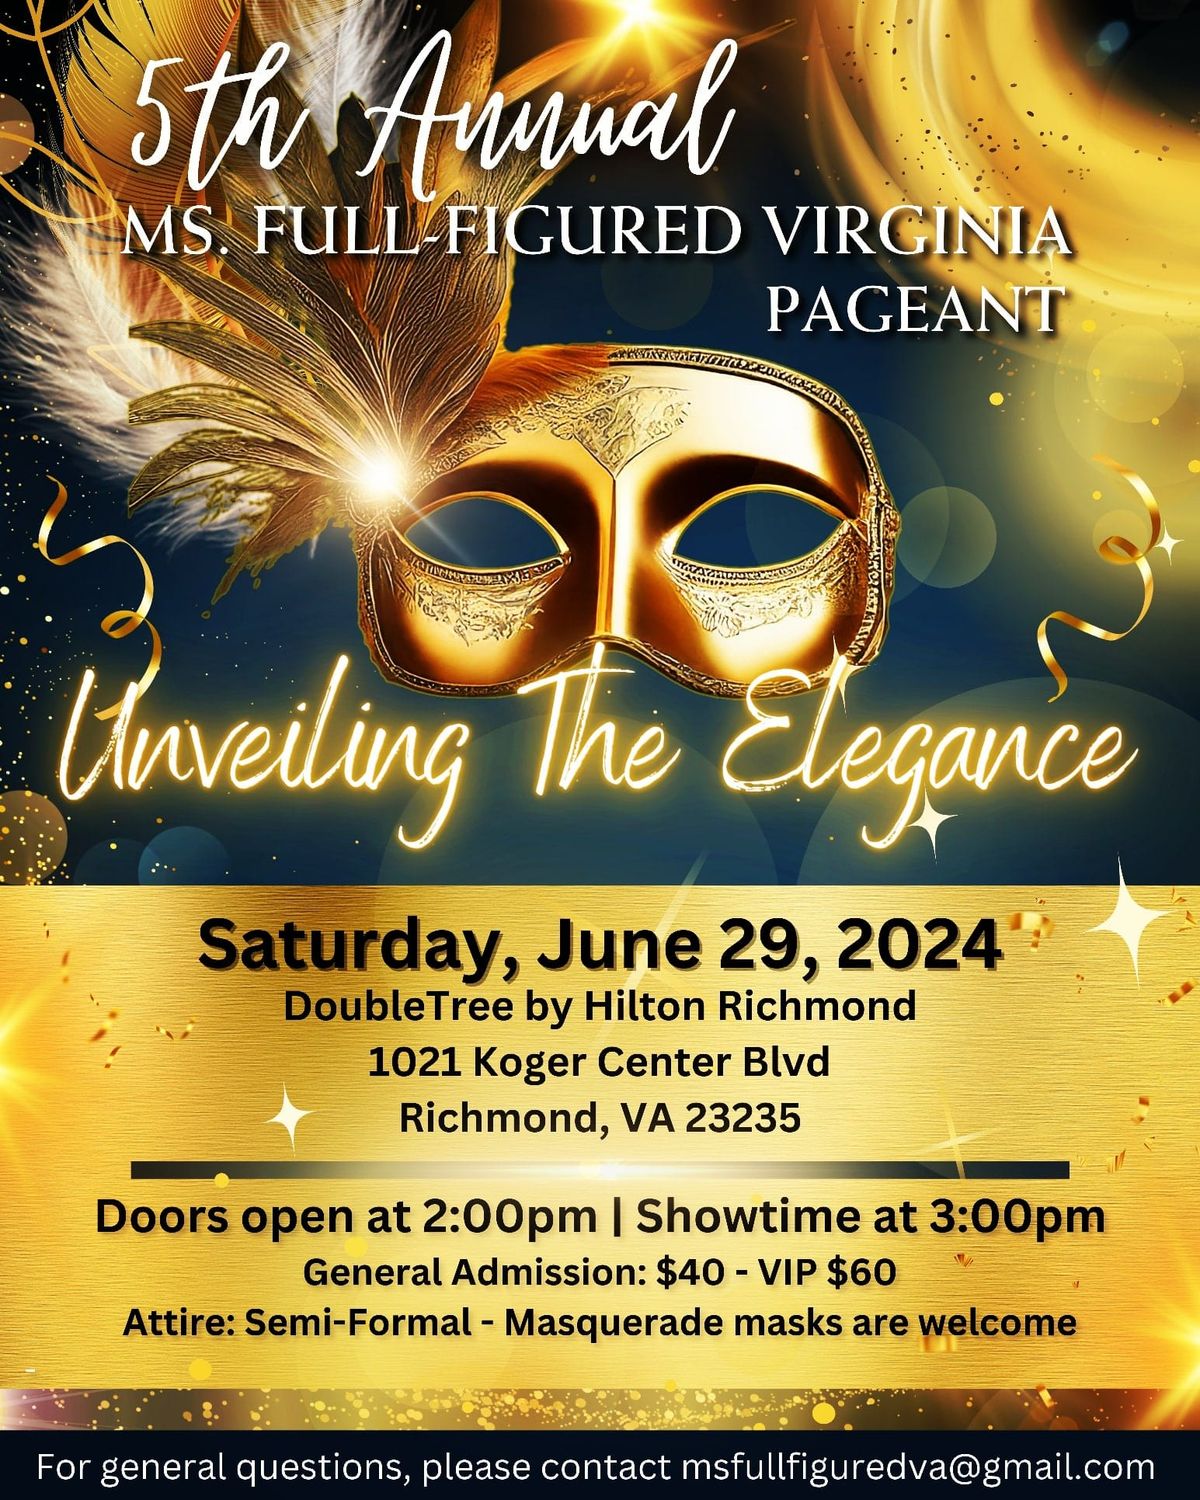 5th Annual Ms. Full-Figured Virginia Pageant 